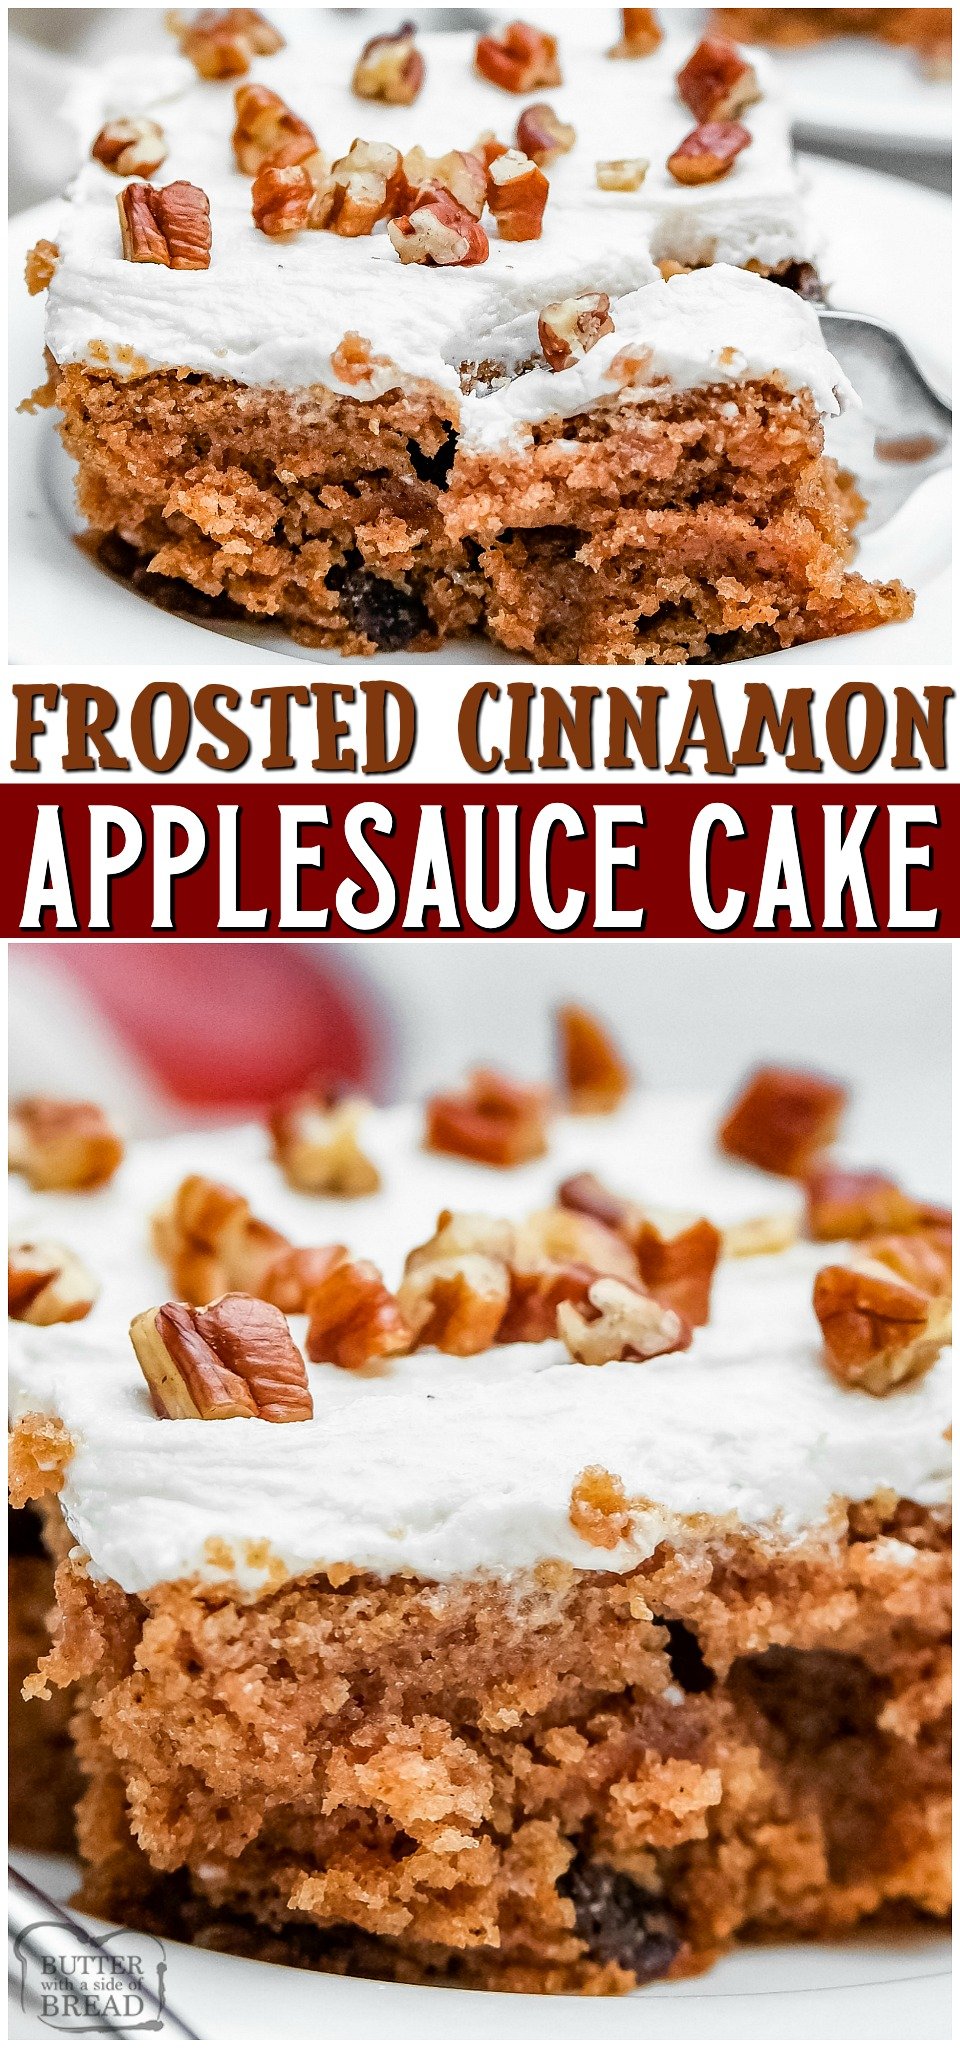 Frosted Applesauce Cake is Fall in cake form! Tender cake with cinnamon & spice, raisins and nuts baked then topped with creamy frosting. Spiced applesauce cake recipe that everyone adores!